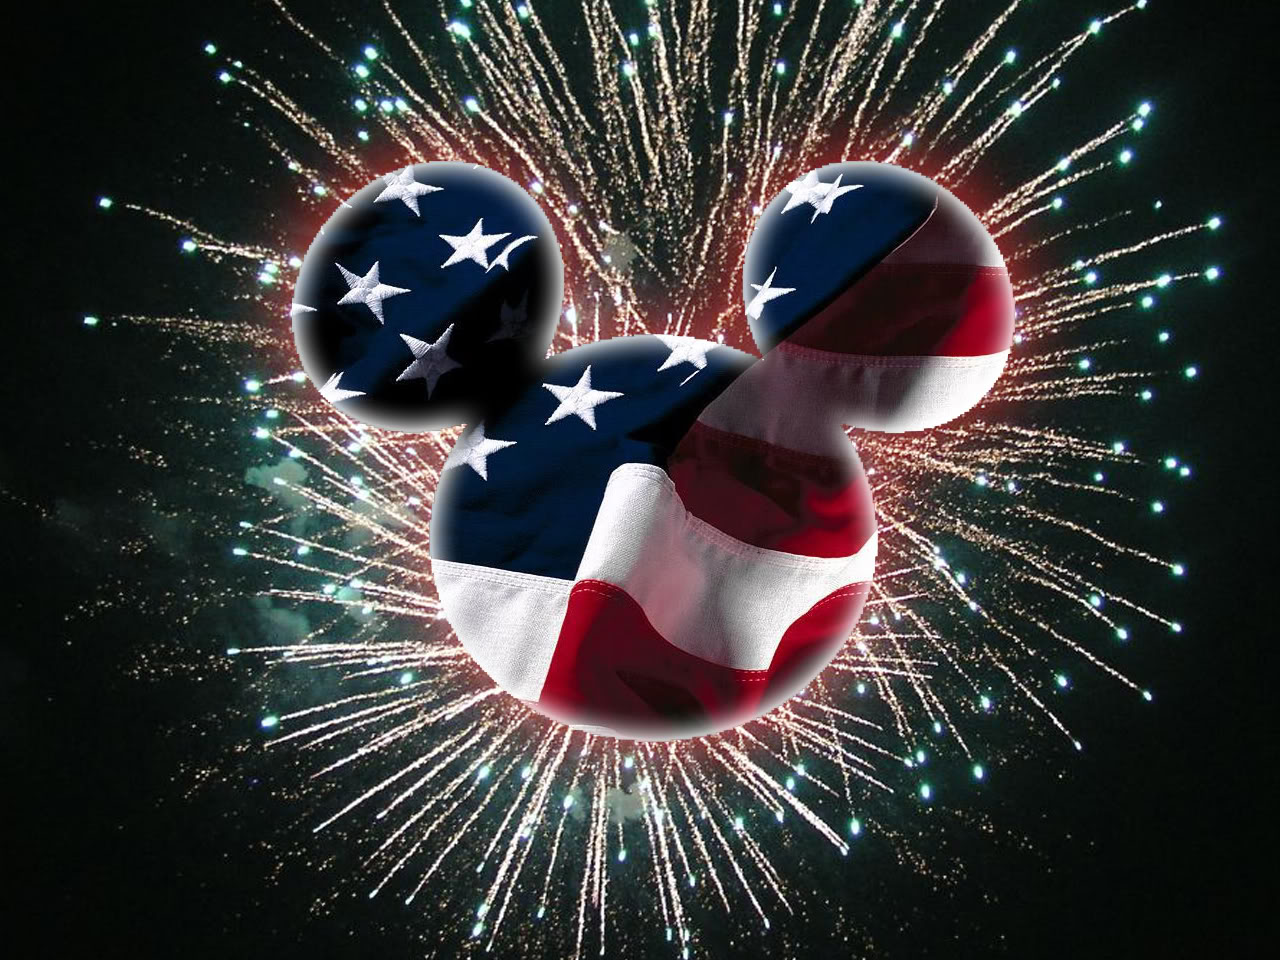 Free download pictures of 4th of july